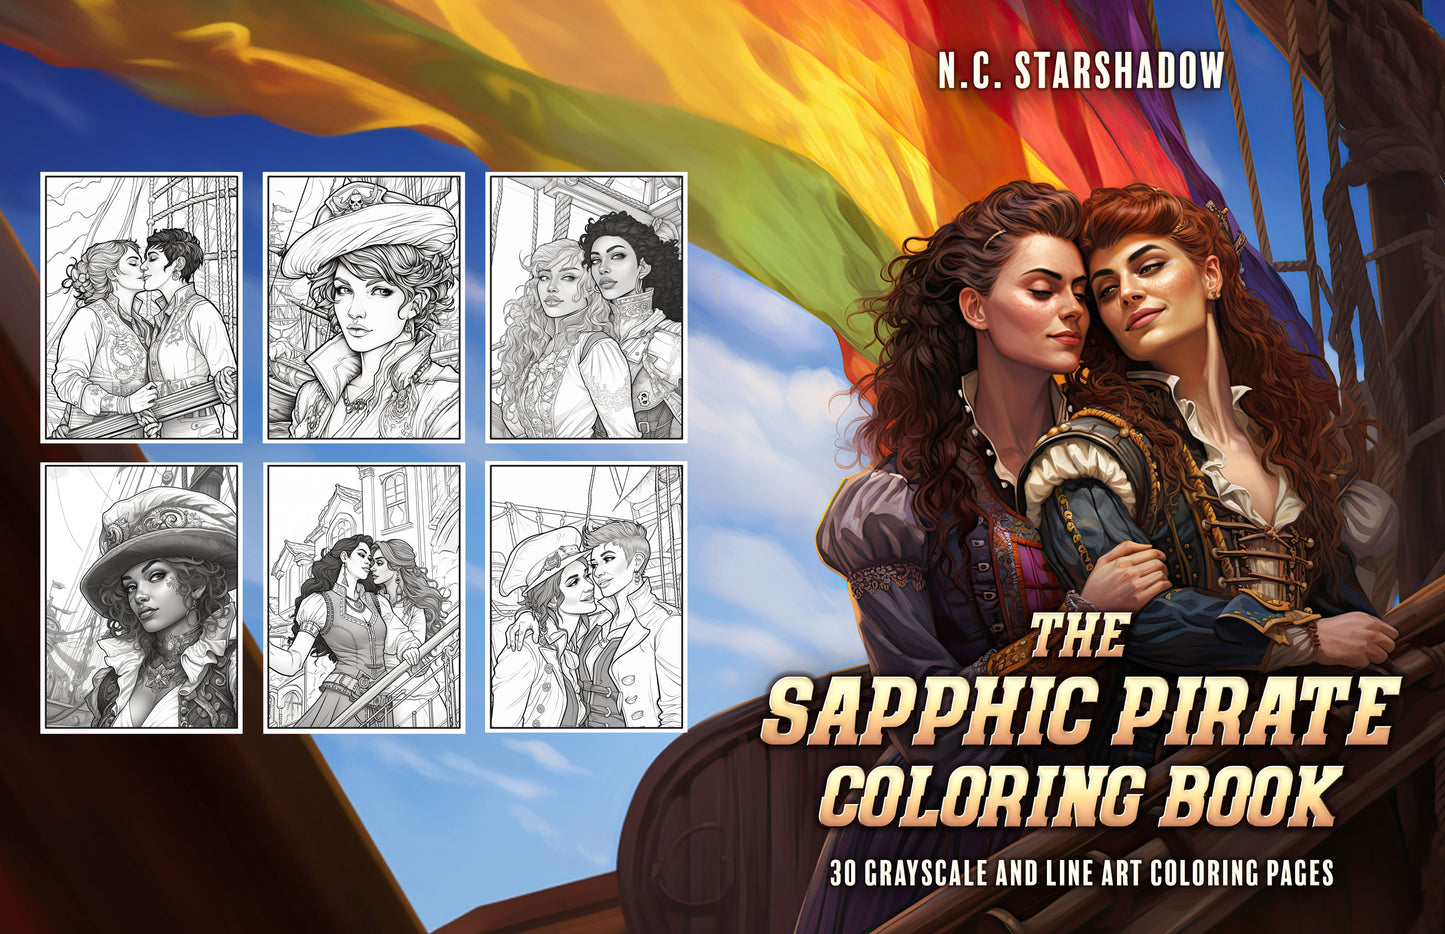 The N.C. Starshadow Sapphic Pirate Coloring Book (Paperback) features an exciting collection of illustrations perfect for coloring enthusiasts.